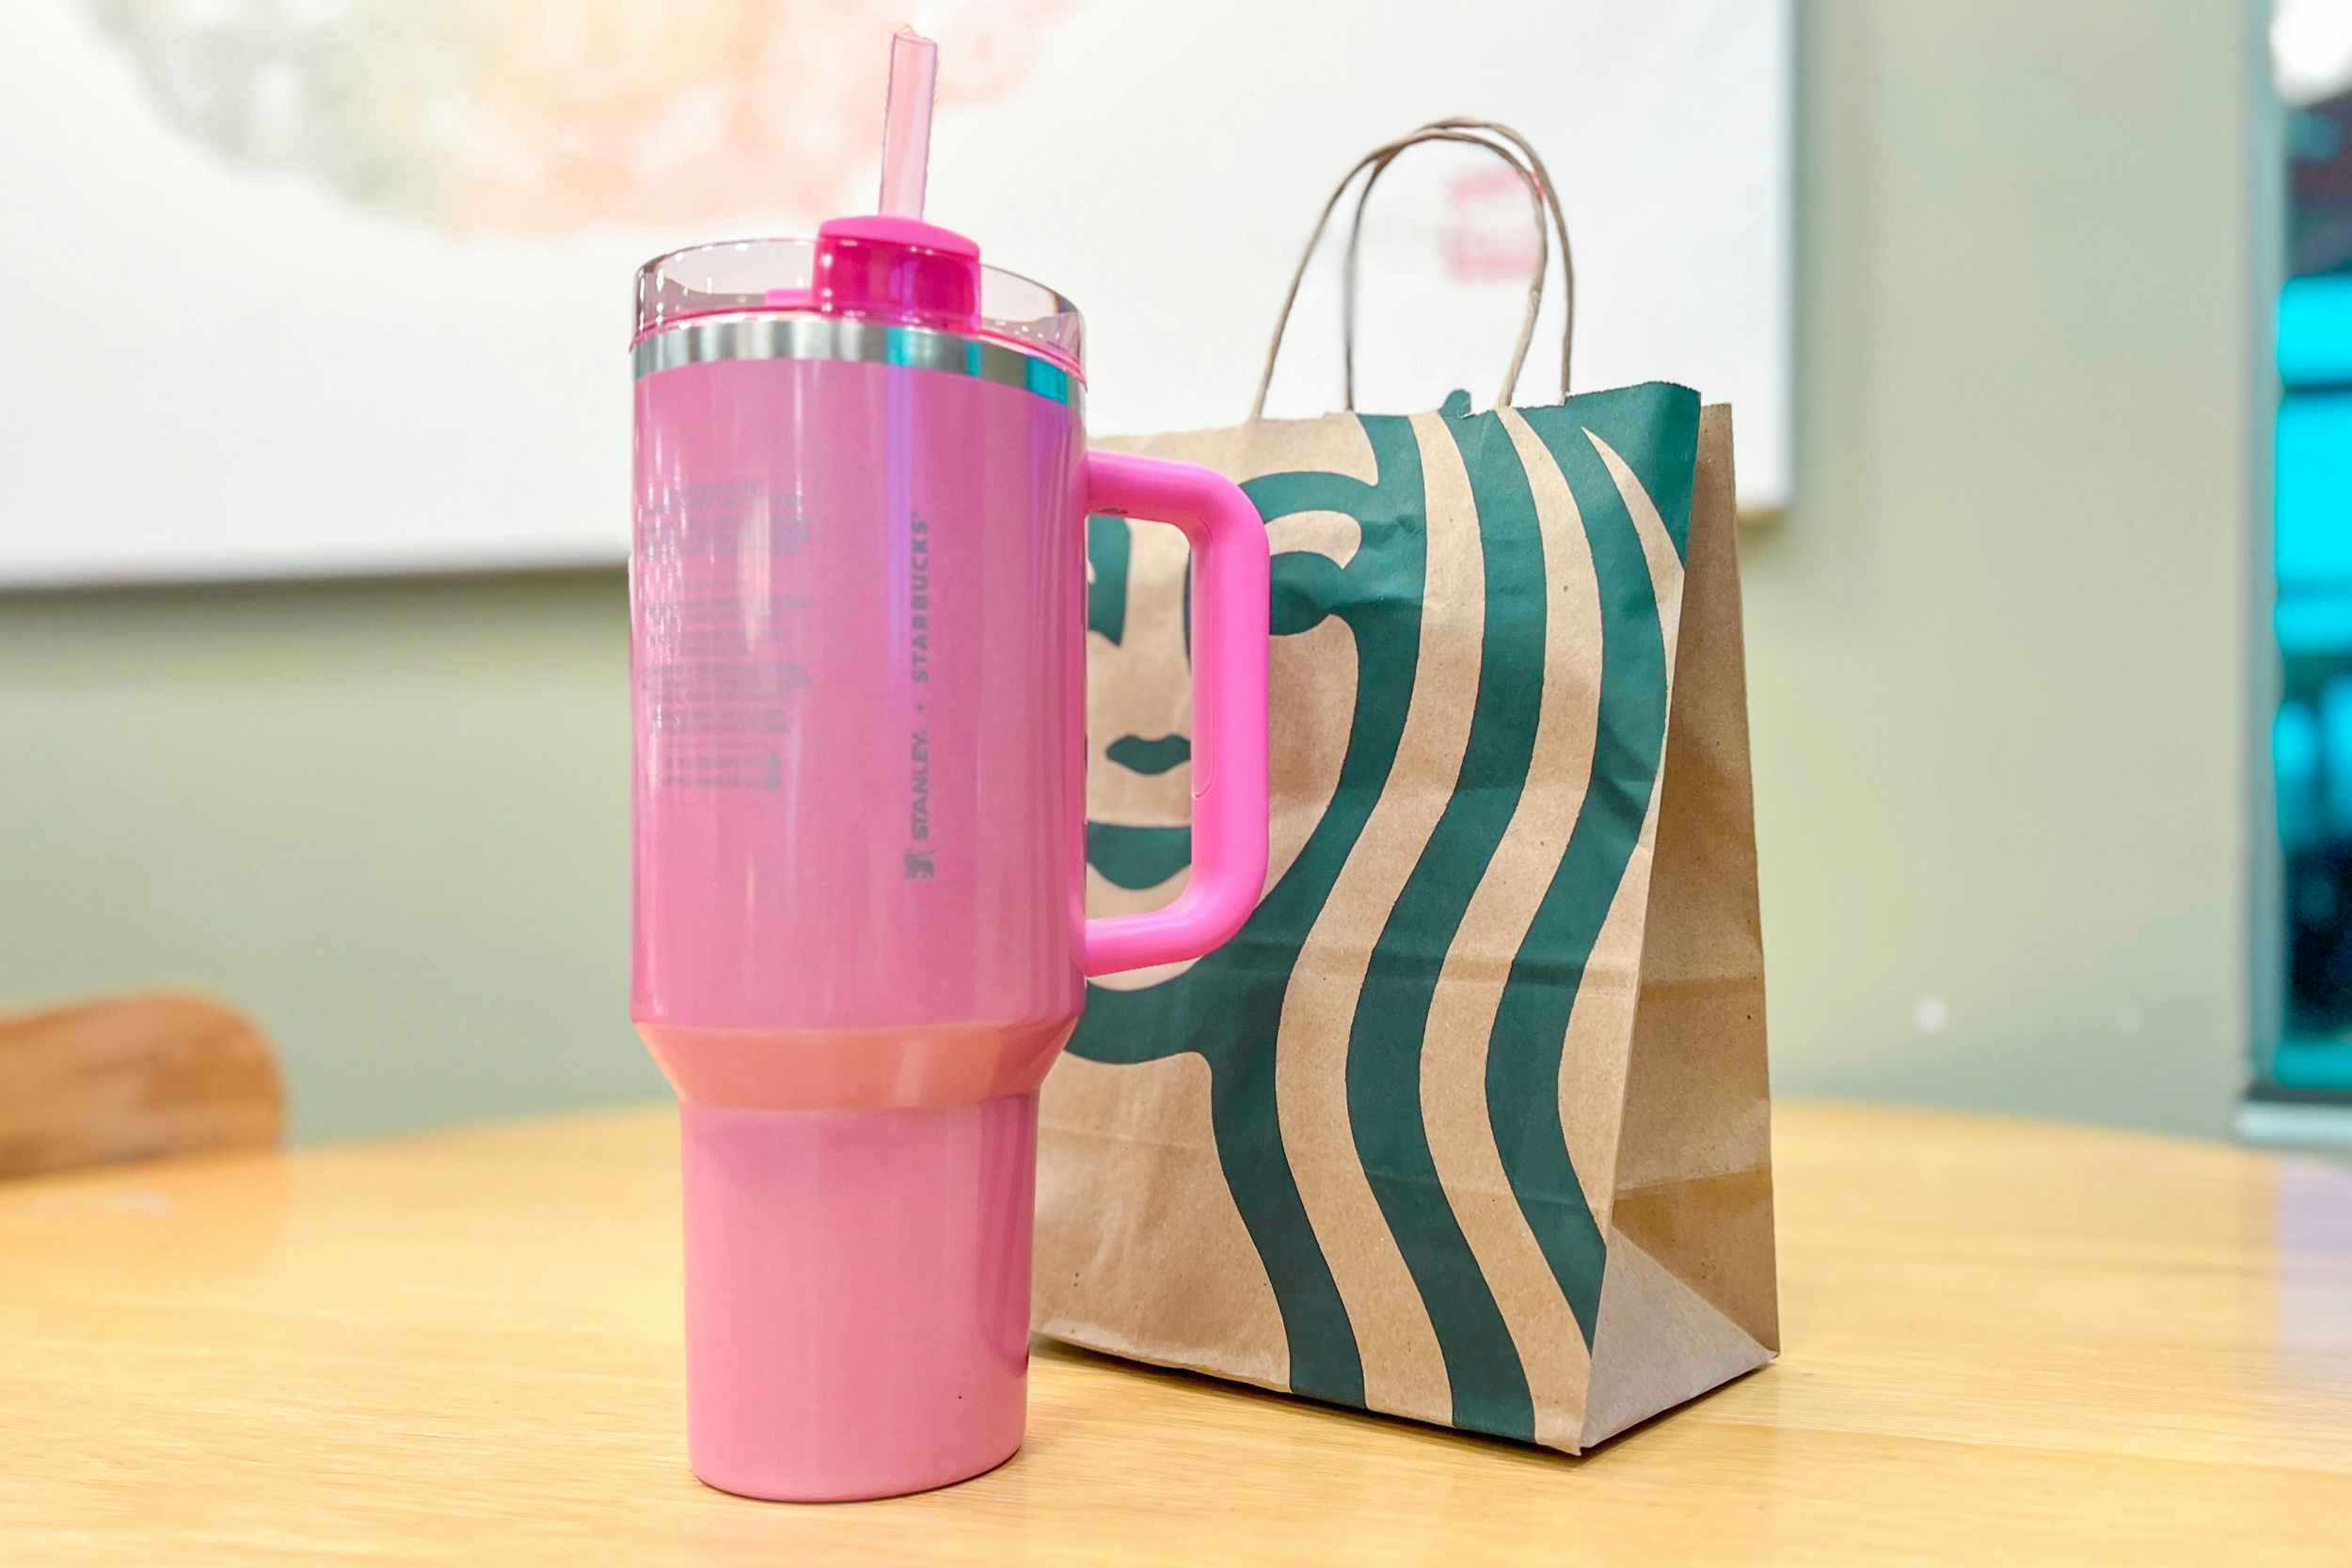 Starbucks pink Stanley cups: Shoppers line up at Targets at 3 a.m.